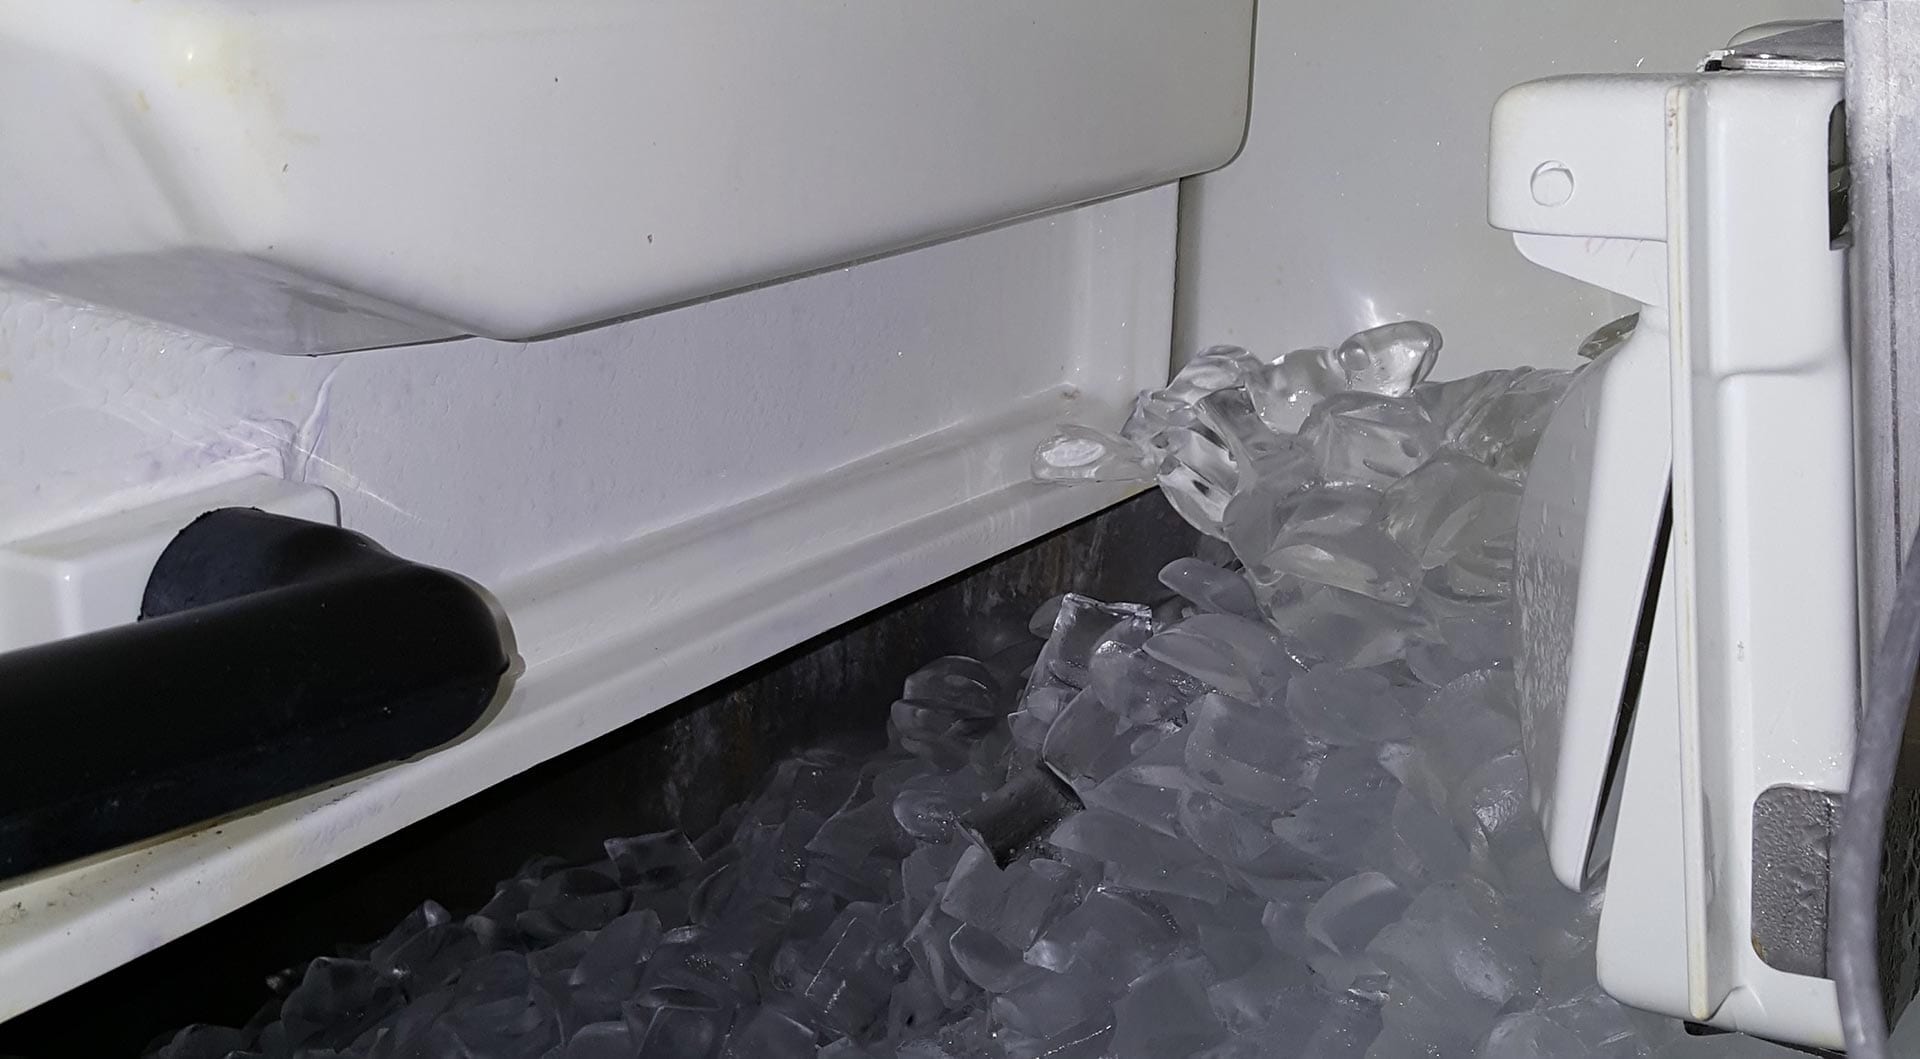 The best way to clean your ice machine